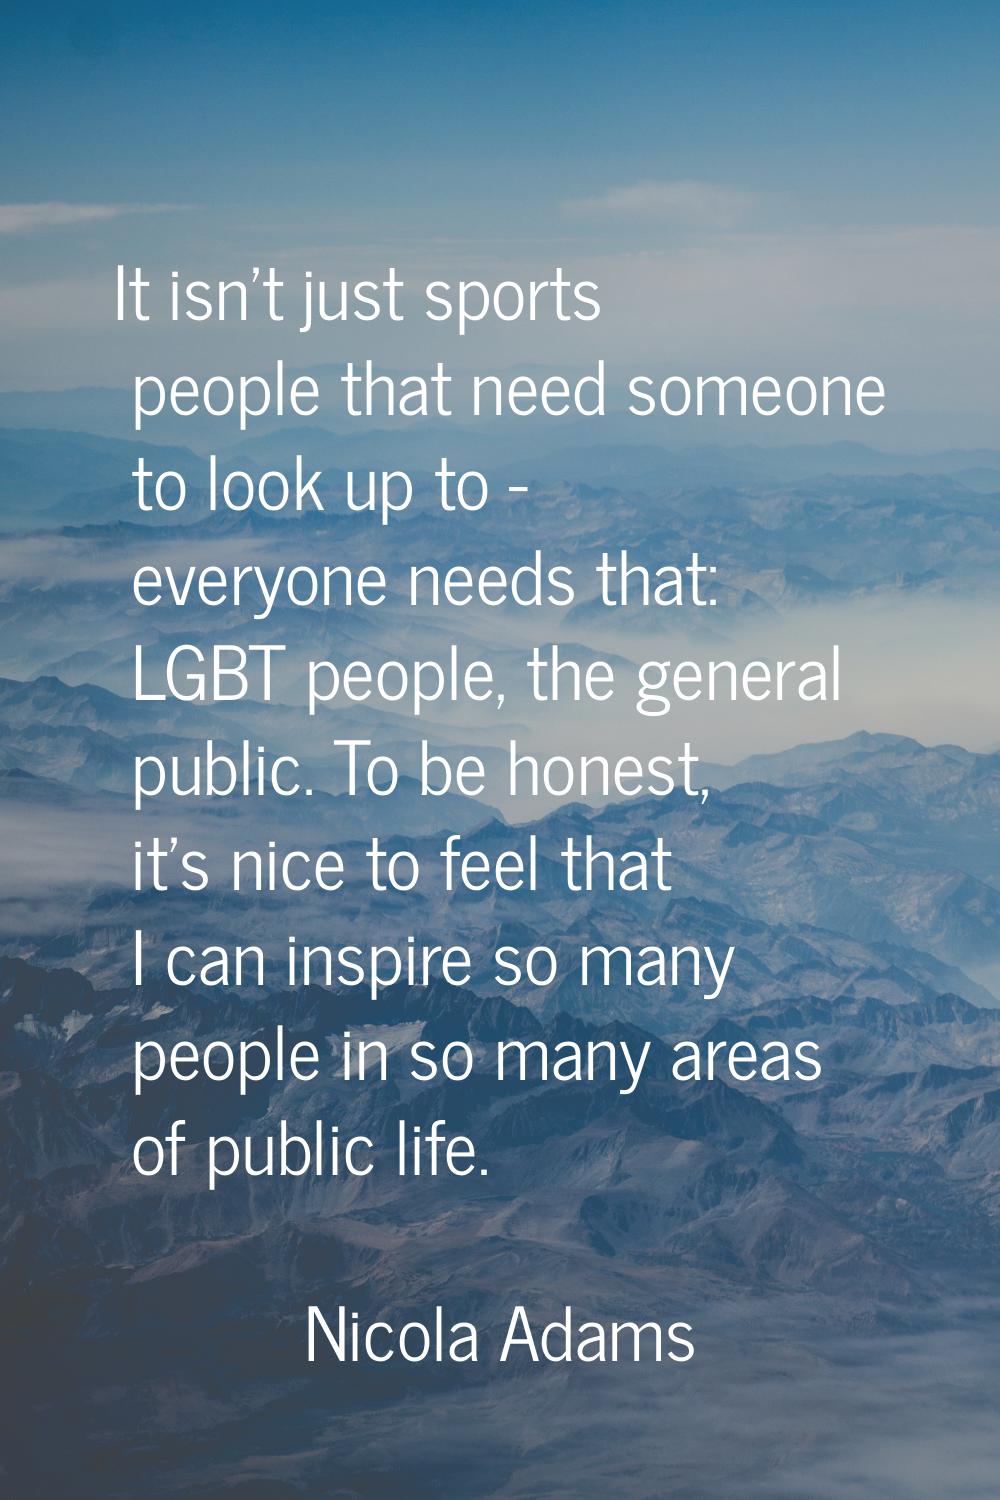 It isn't just sports people that need someone to look up to - everyone needs that: LGBT people, the